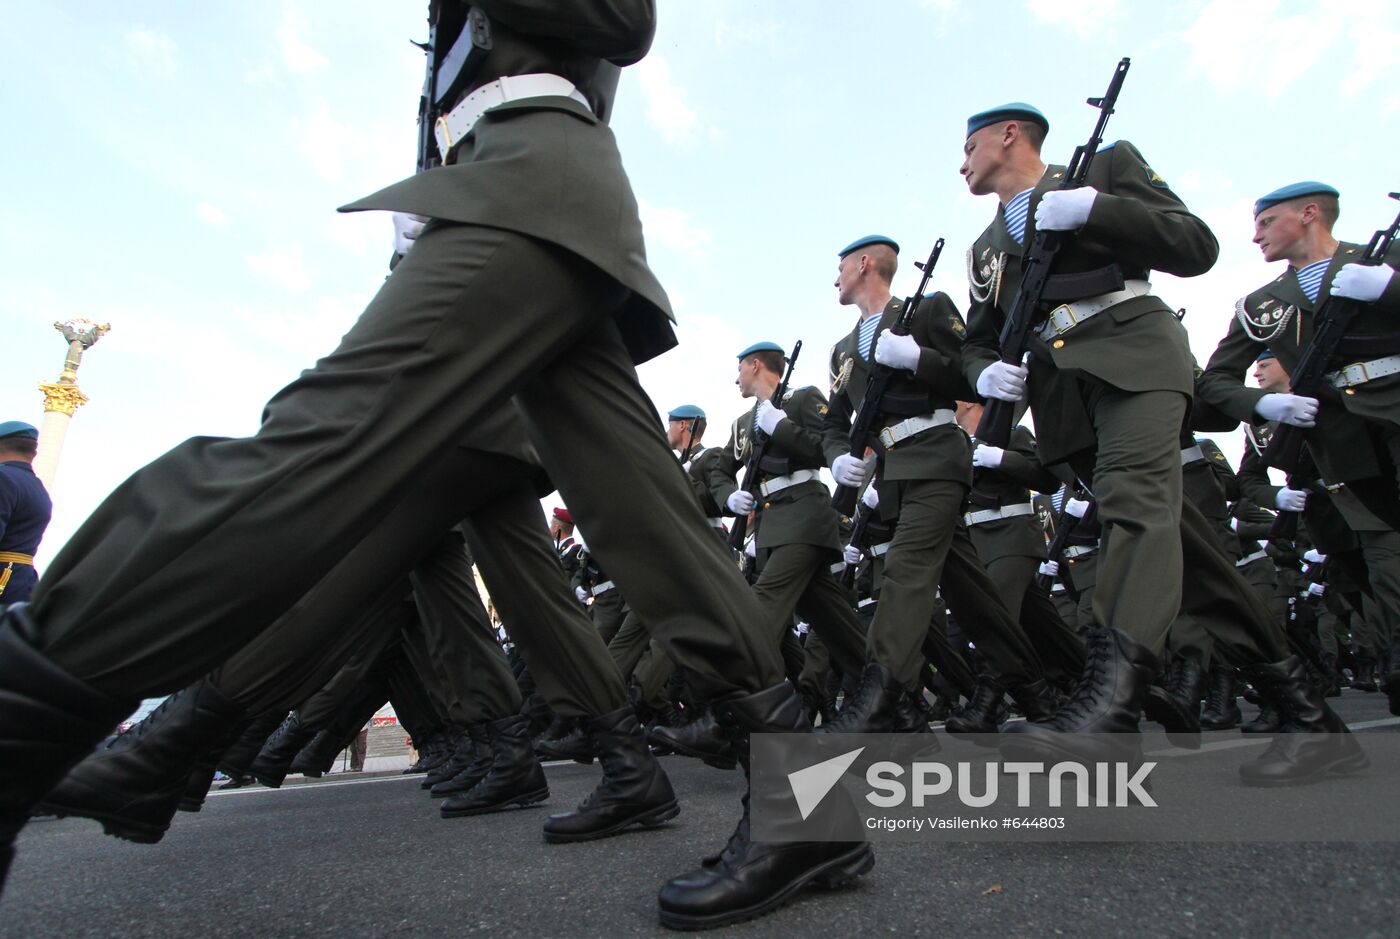 Dress rehearsal for Victory Day parade in Kiev